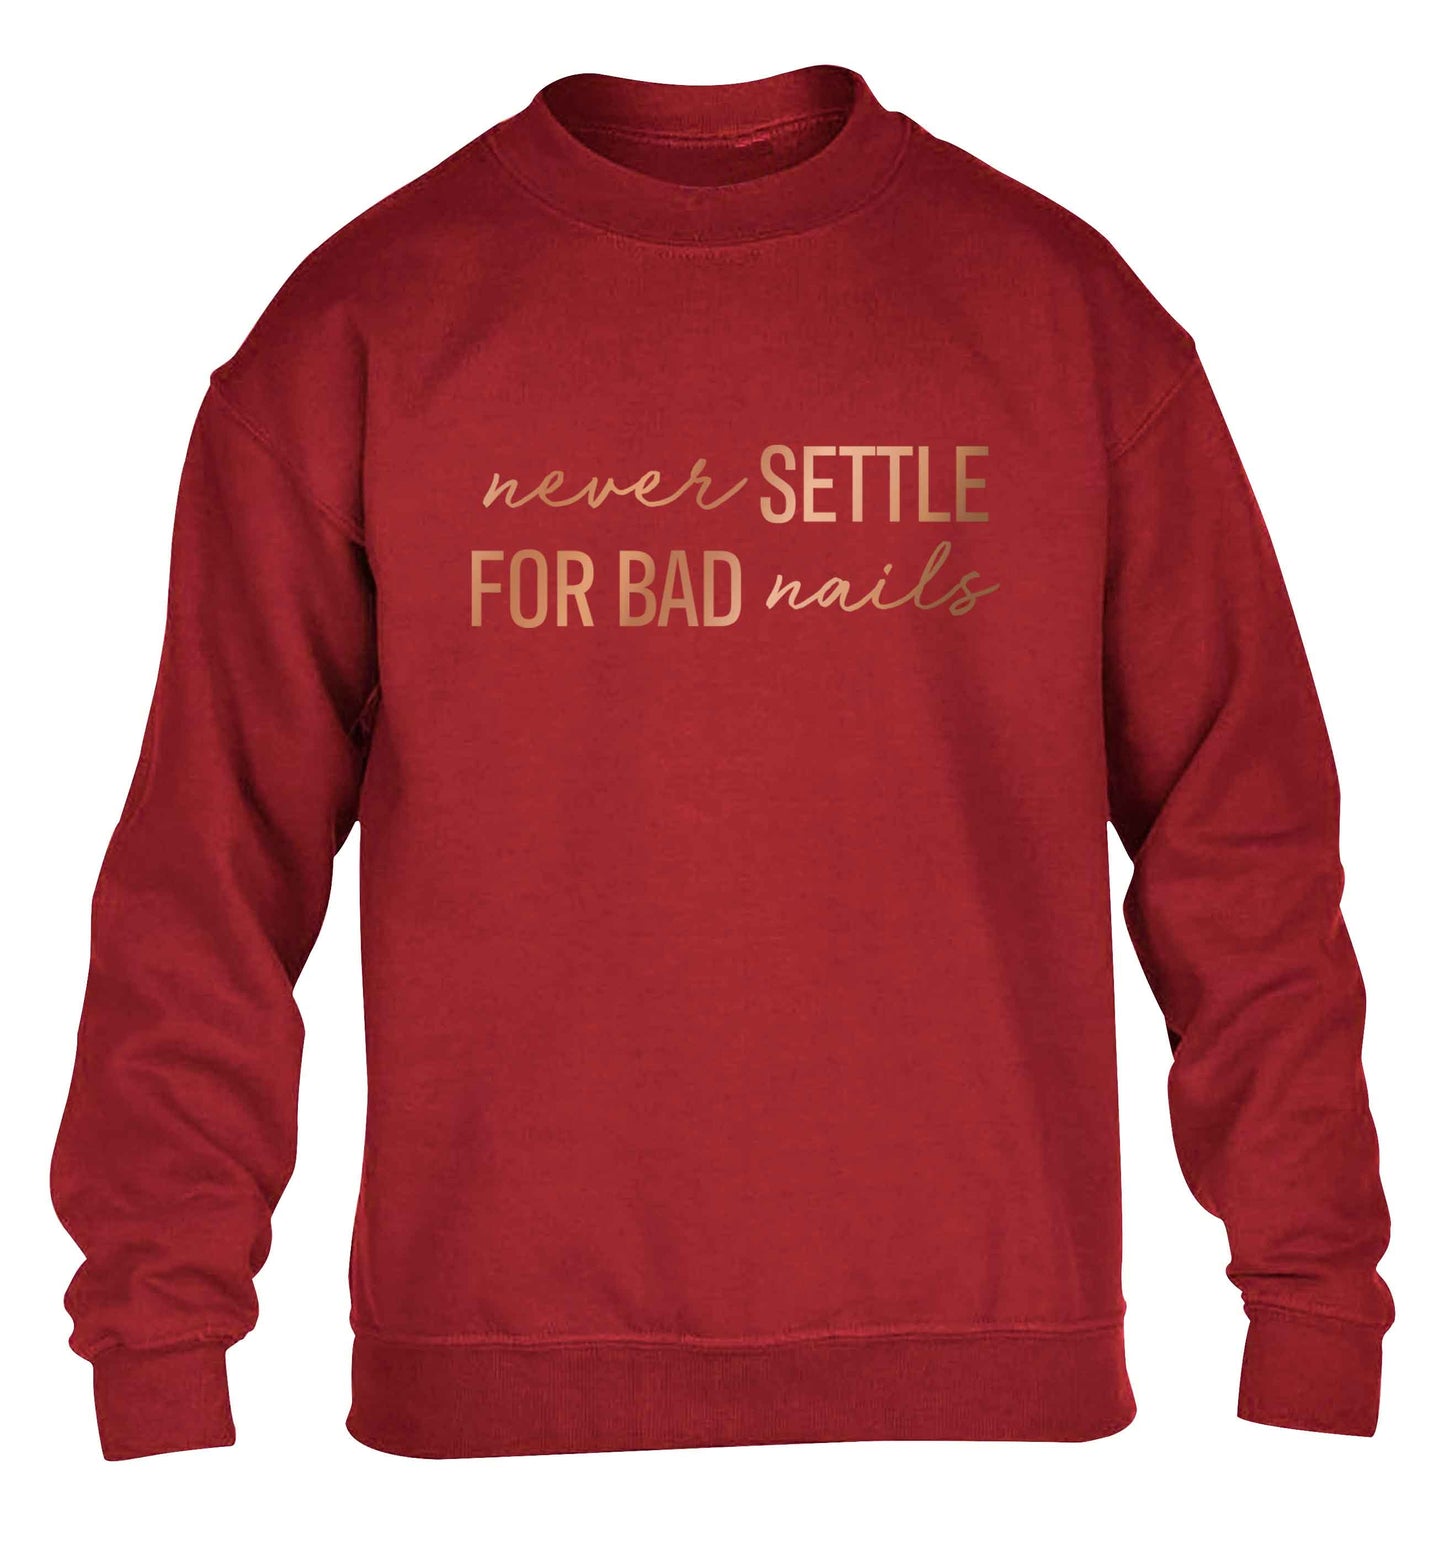 Never settle for bad nails - rose gold children's grey sweater 12-13 Years